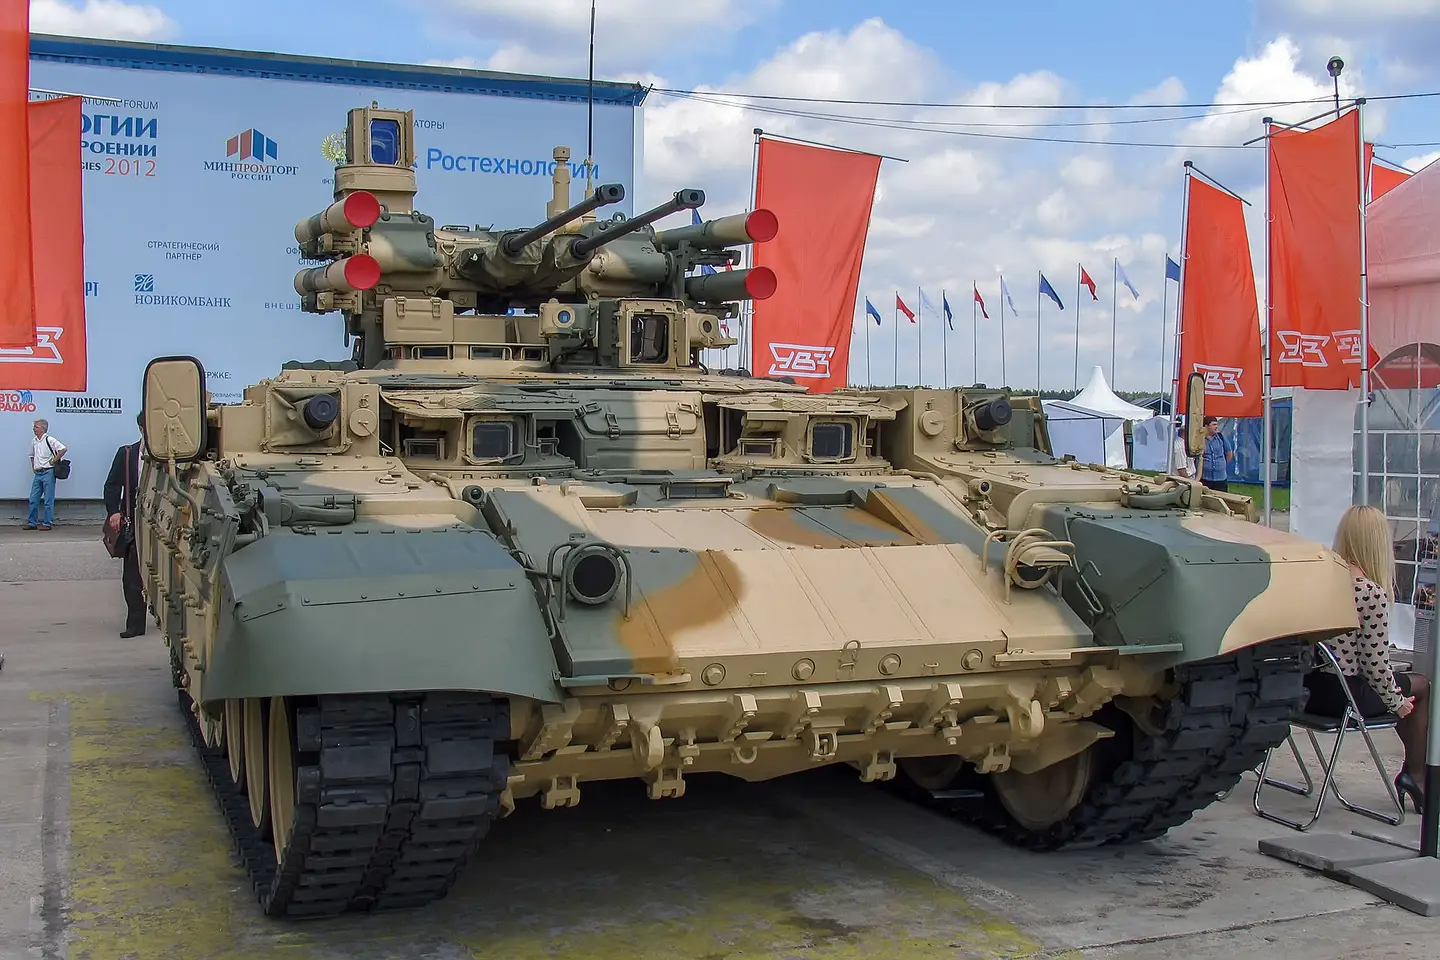 The interim BMPT configuration, with twin autocannons and Ataka missiles in individual tubes. <em>Credit:</em> <em>Vitaly V. Kuzmin/Wikimedia Commons</em>